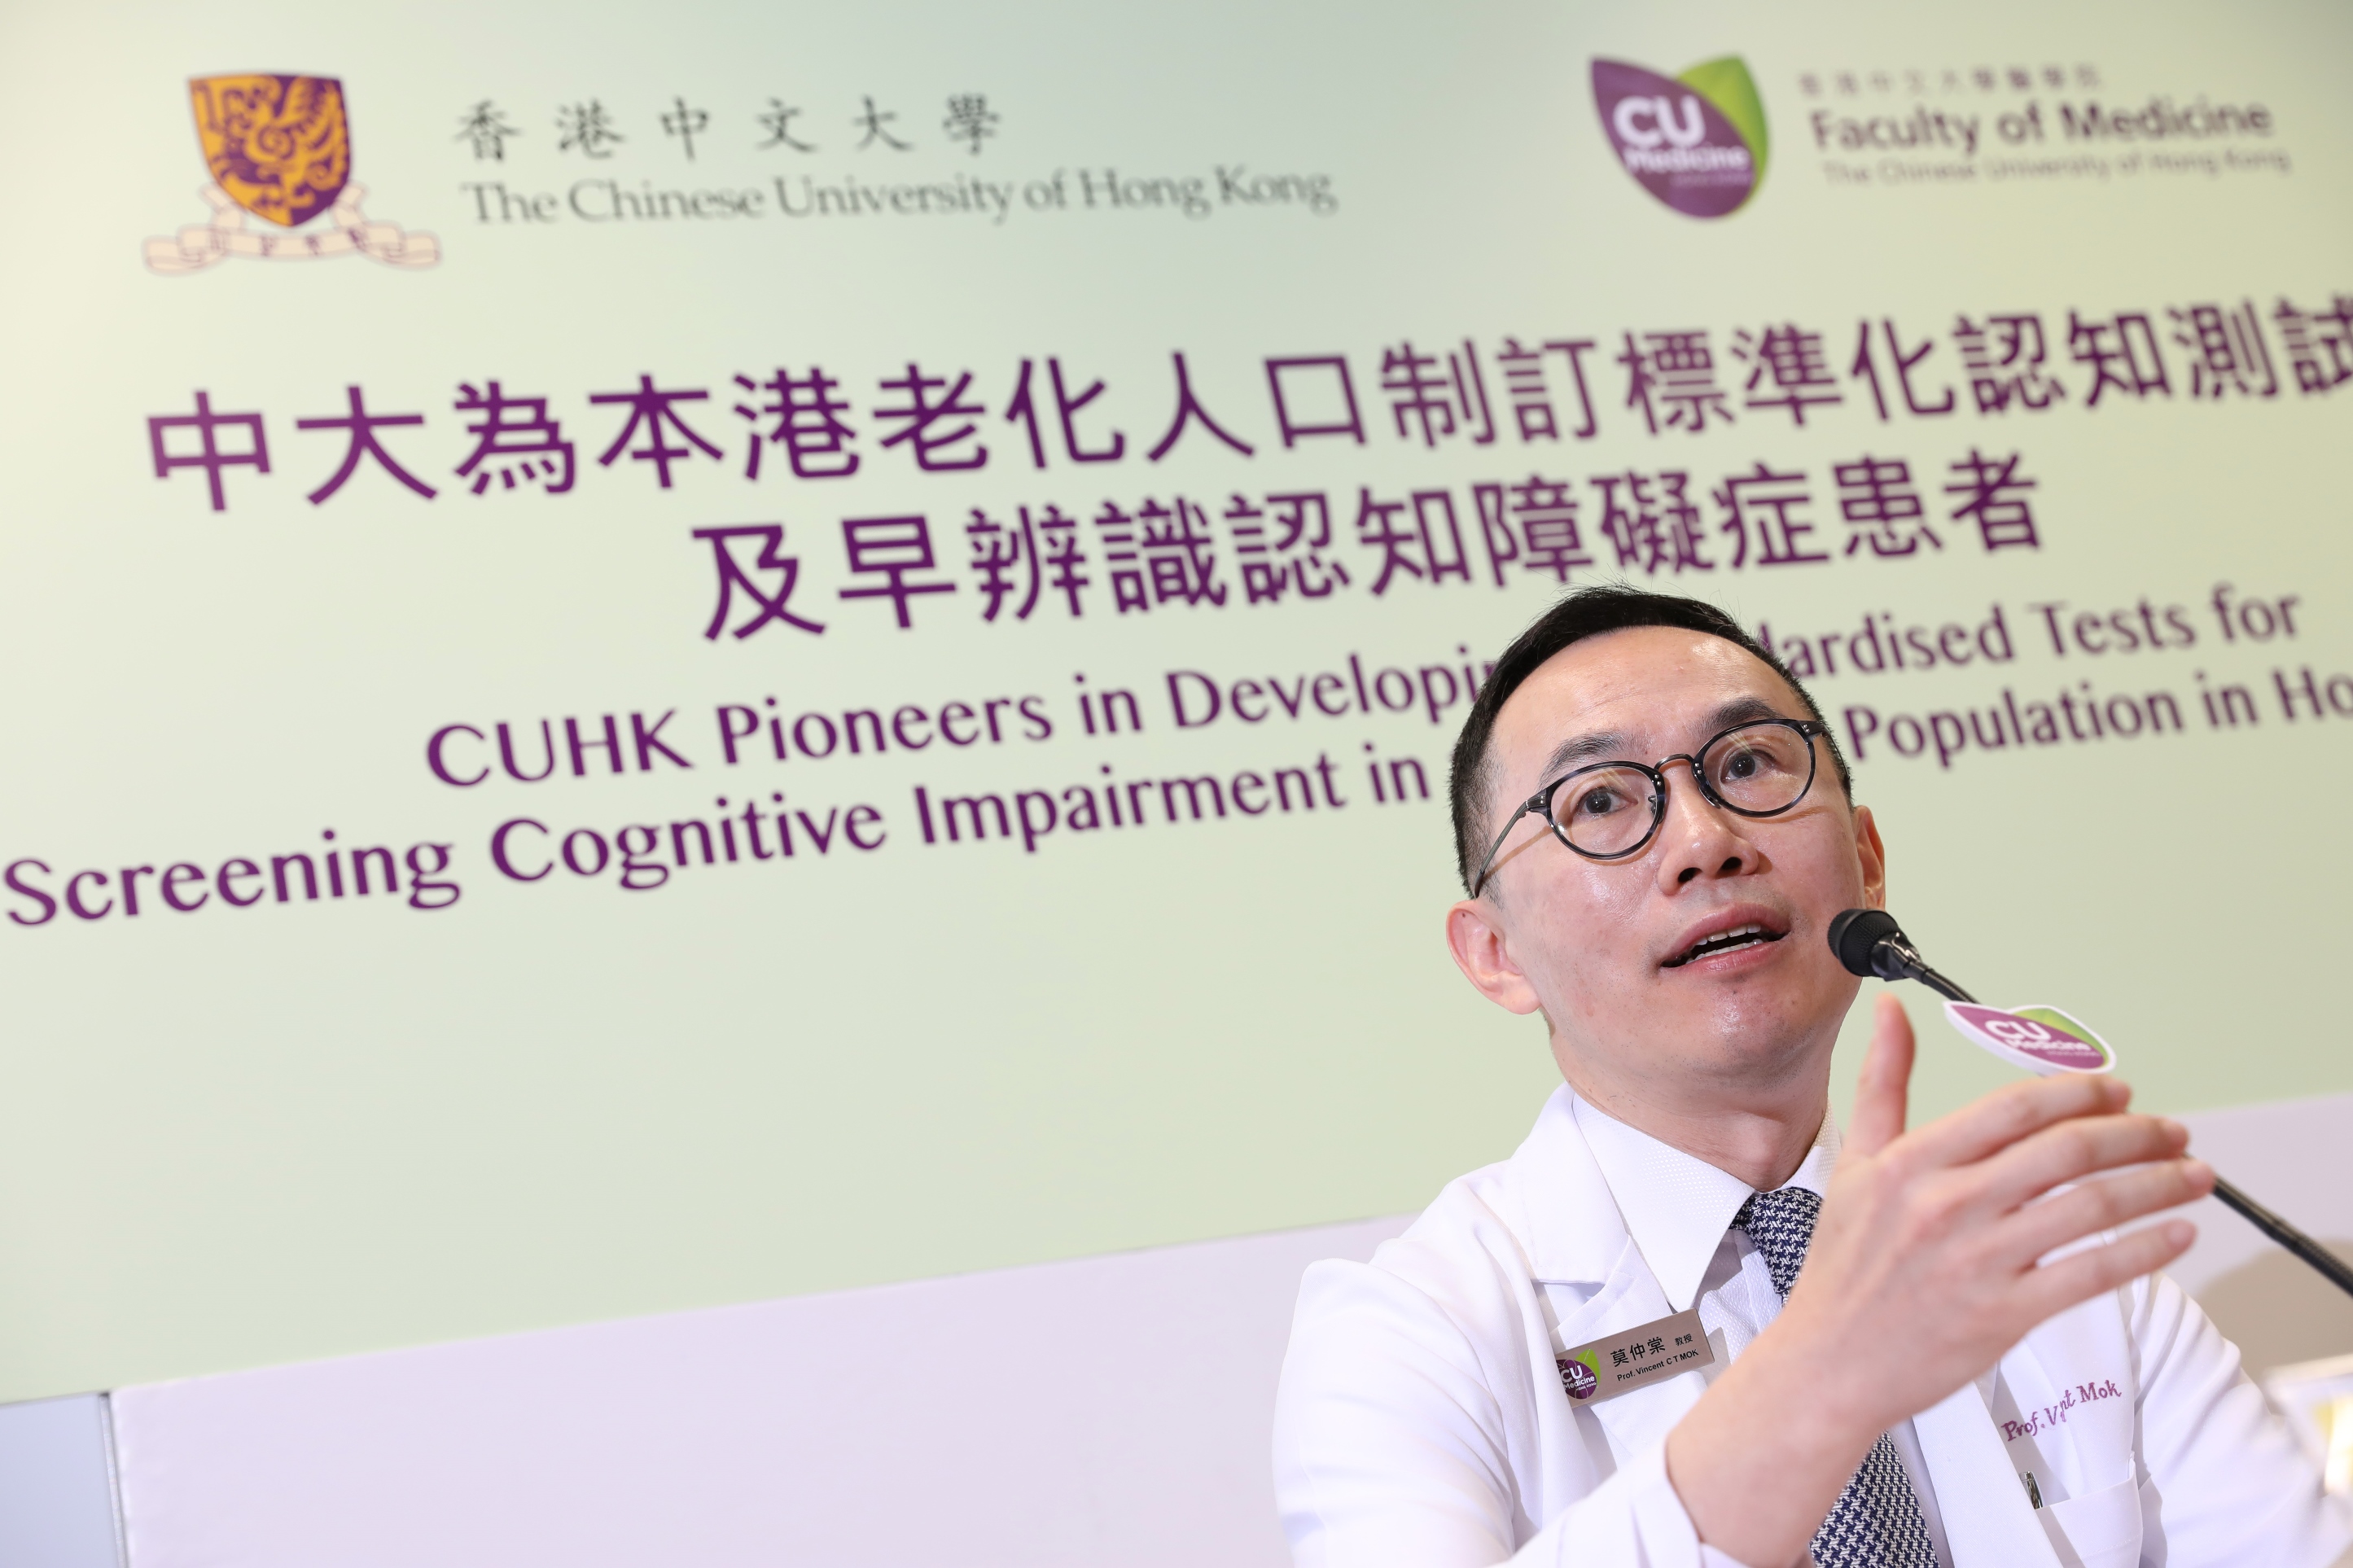 Prof. Vincent Chung Tong MOK says the two sets of tools are now widely used by healthcare and social welfare professionals in the territory. Their team has provided training to over 4,500 social and healthcare professionals from different hospitals and NGOs all over Hong Kong.